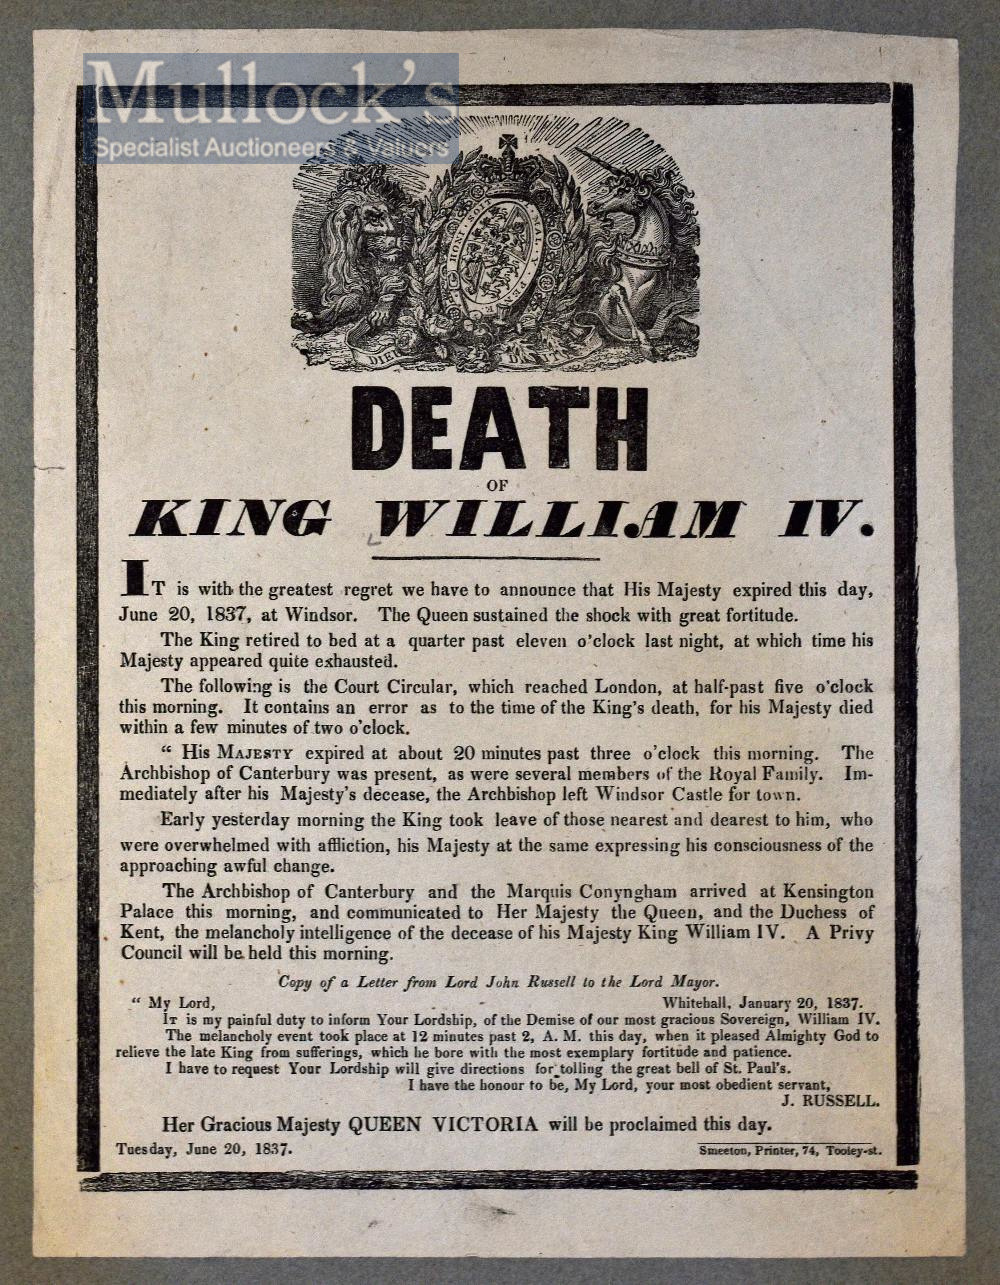 1837 ‘Death of King William IV’ Broadside – it is with greatest regret we have to announce that